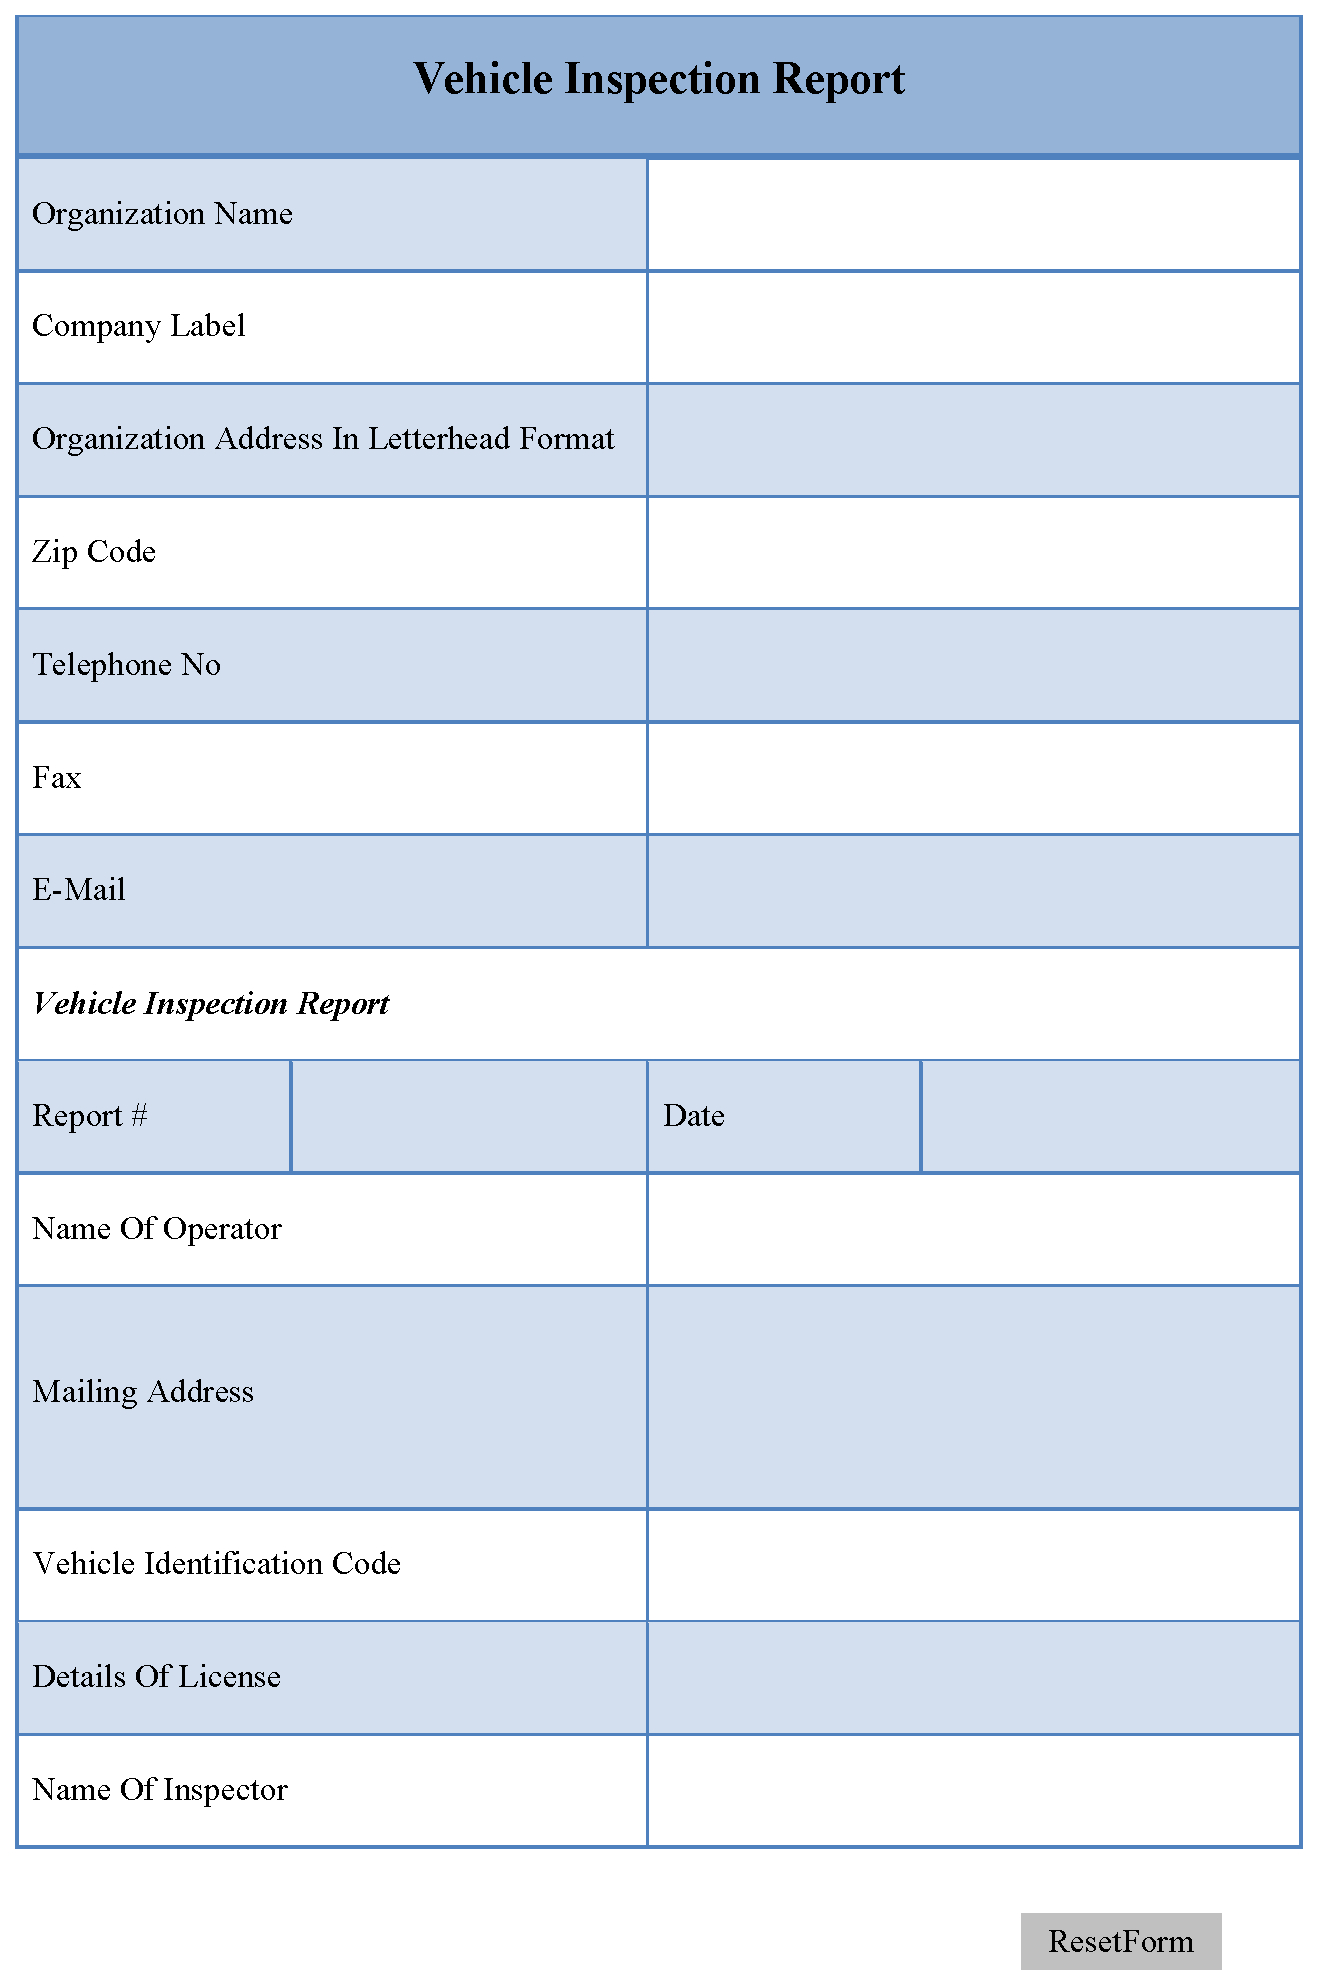 Vehicle Inspection Report Template | Editable Forms Regarding Vehicle Inspection Report Template